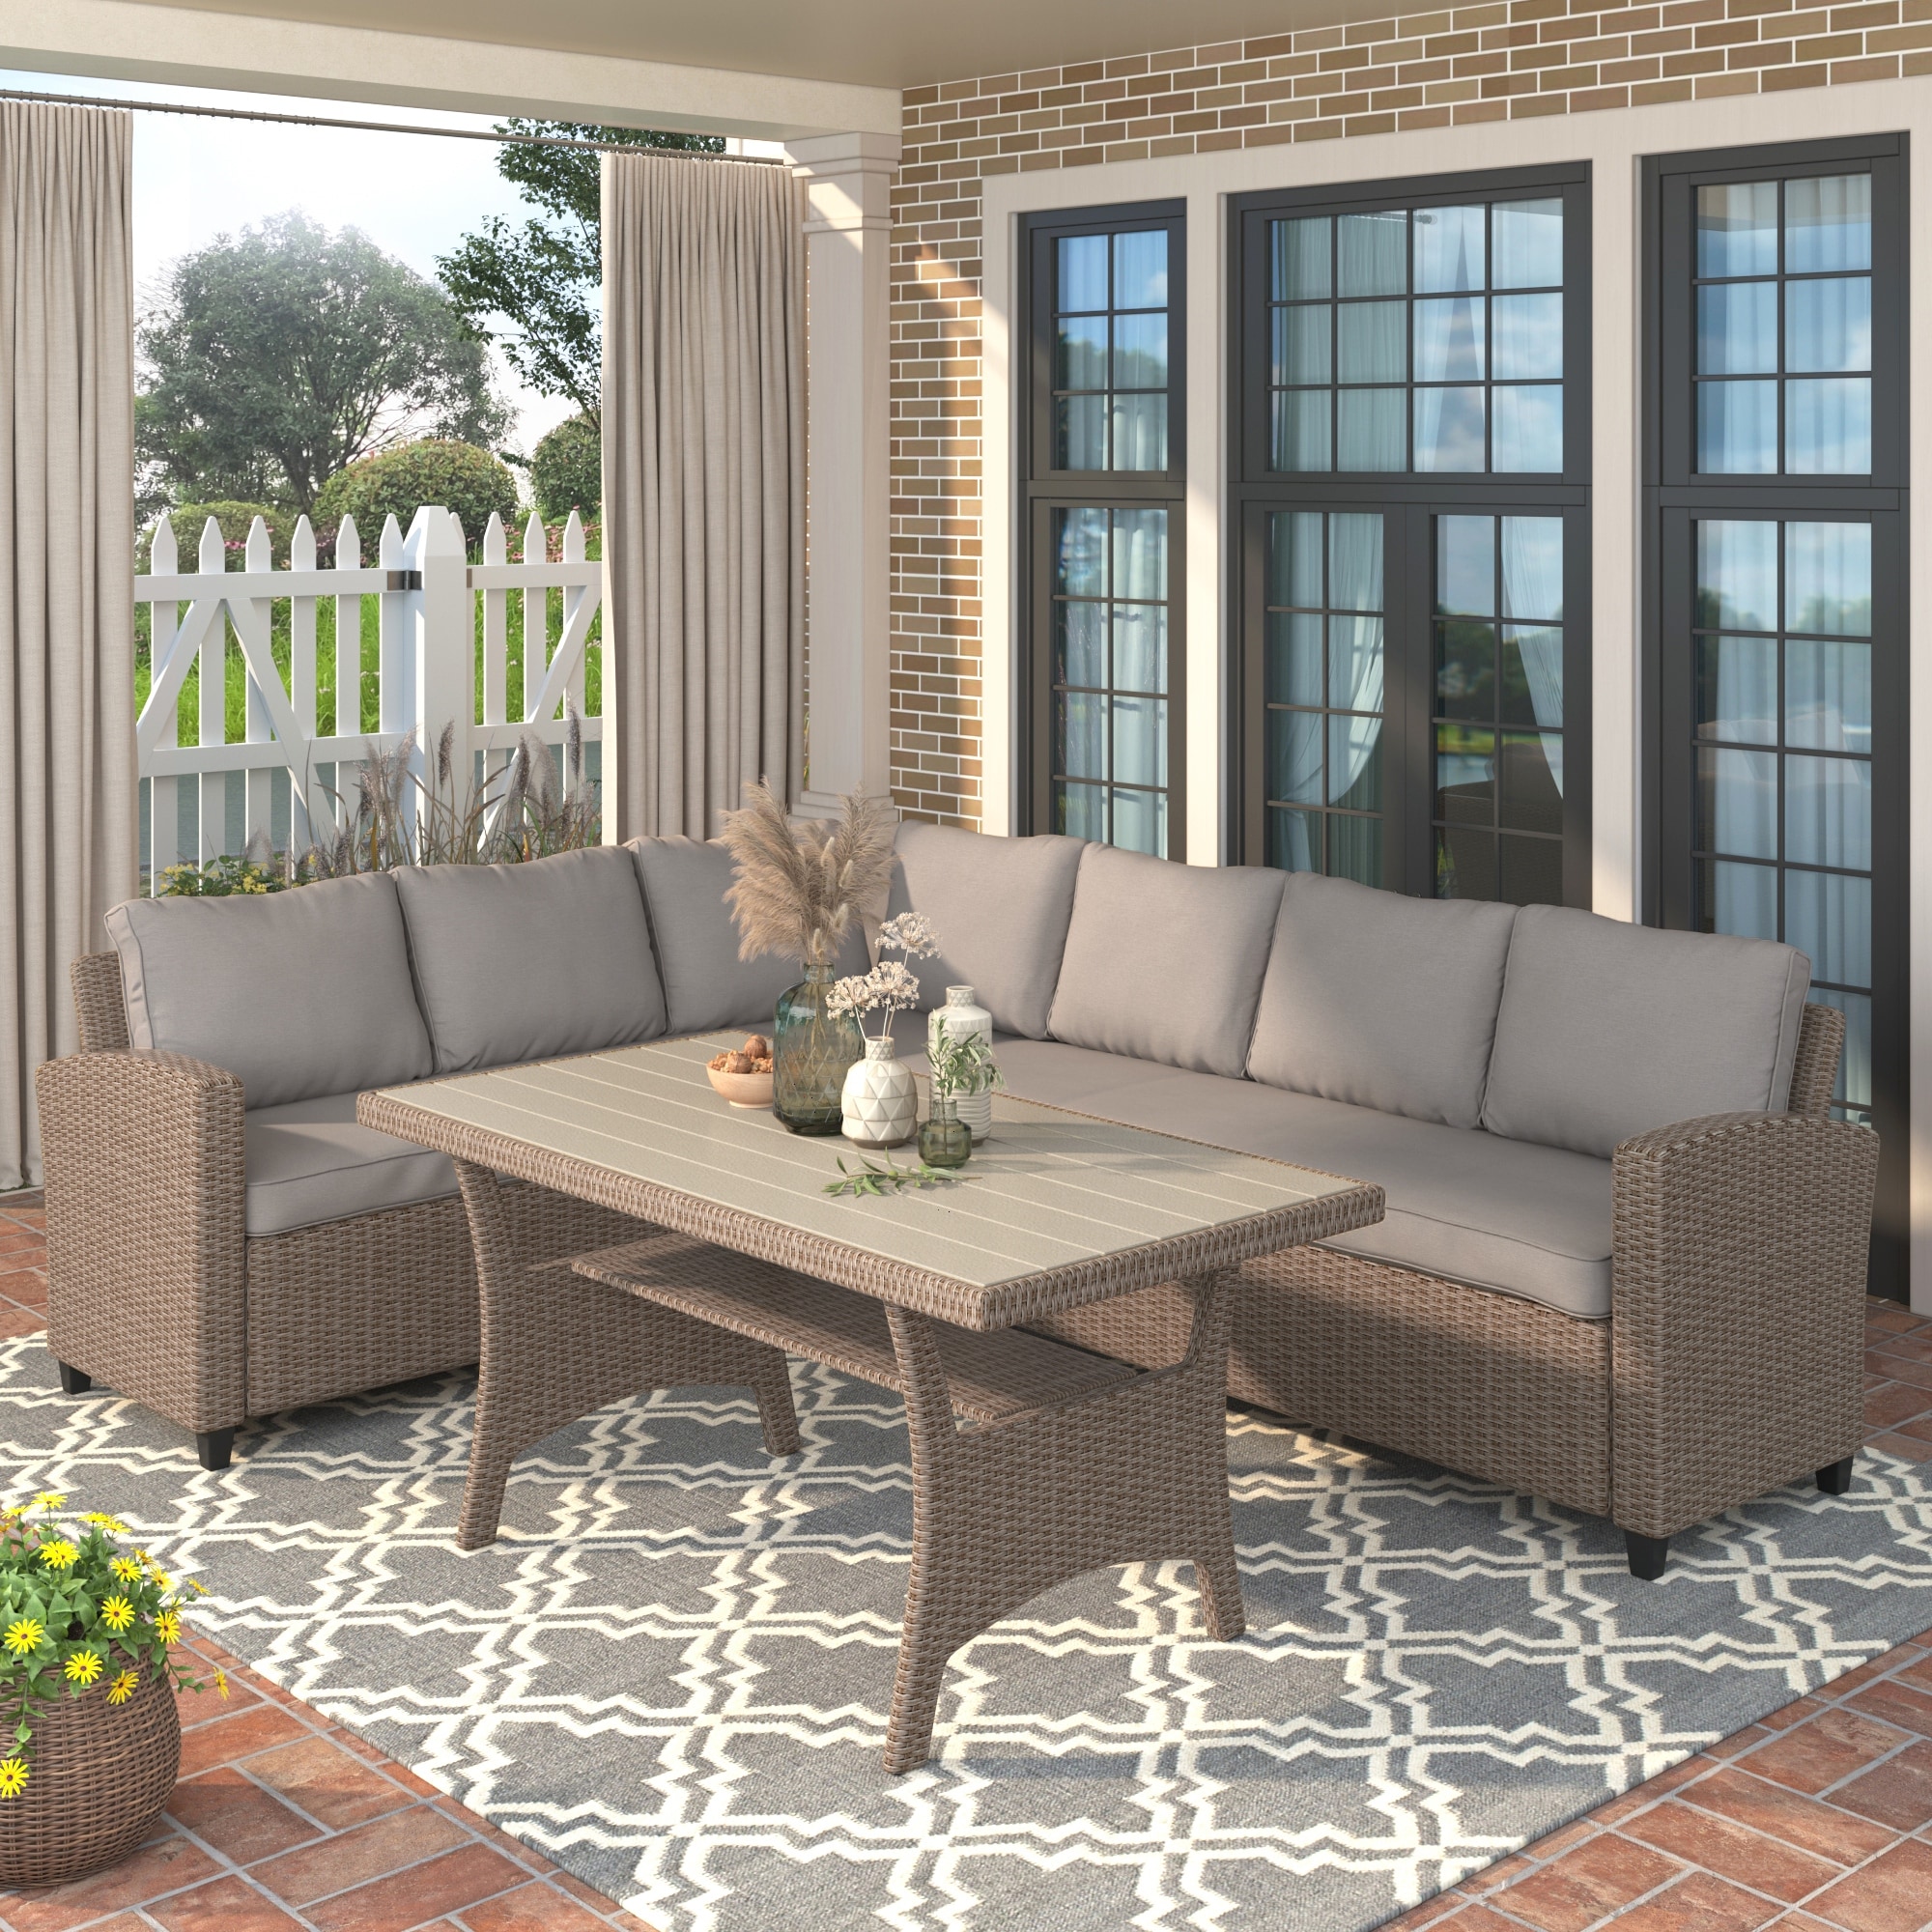 3-piece Rattan Wicker Outdoor Cushioned Sofa Set With 2-tier Storage Dining Table